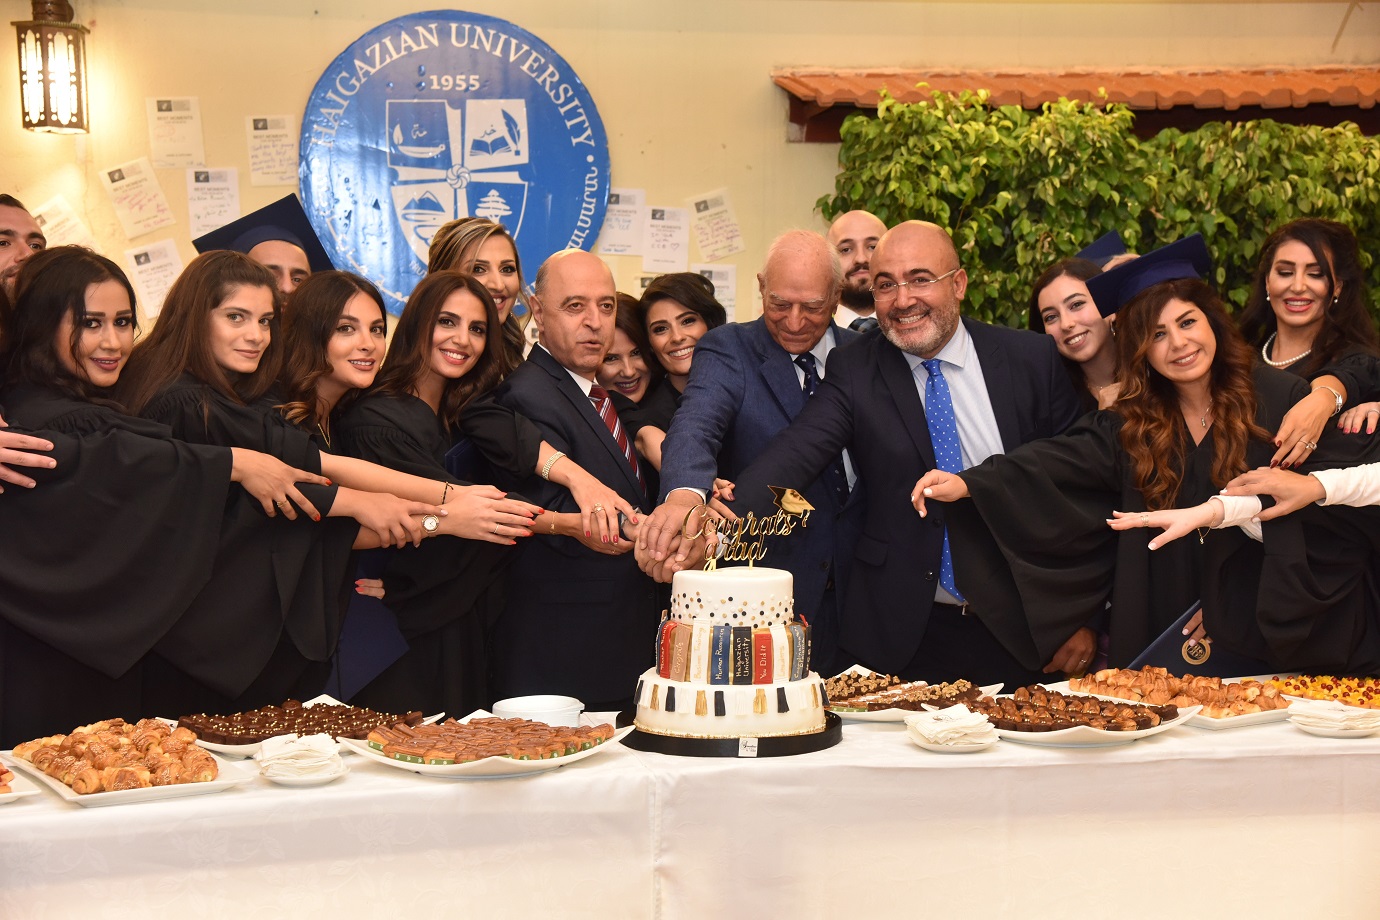 The Center for Continuing Education (CCE) at Haigazian University Celebrates its 2019 Harvest